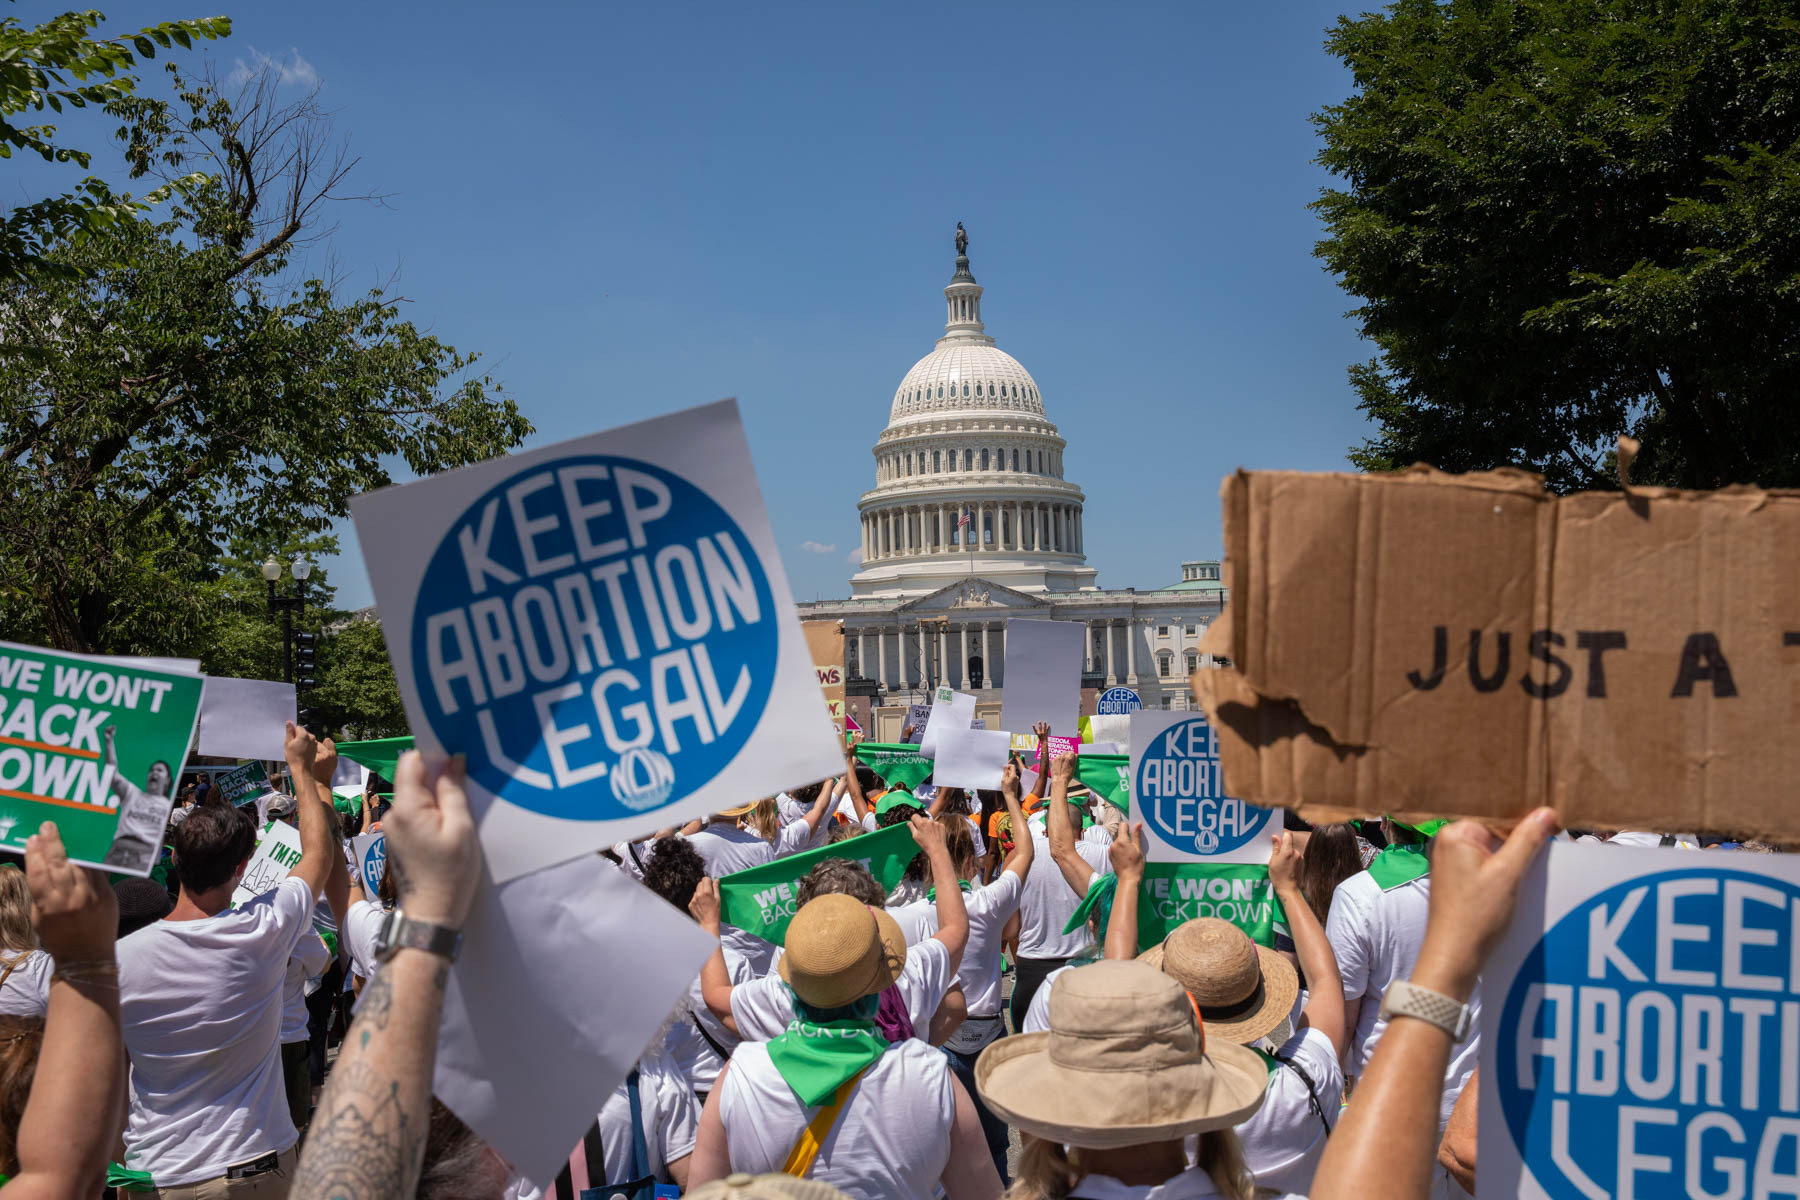 2023 Top Stories #5: Continuing impact of overturning Roe v. Wade